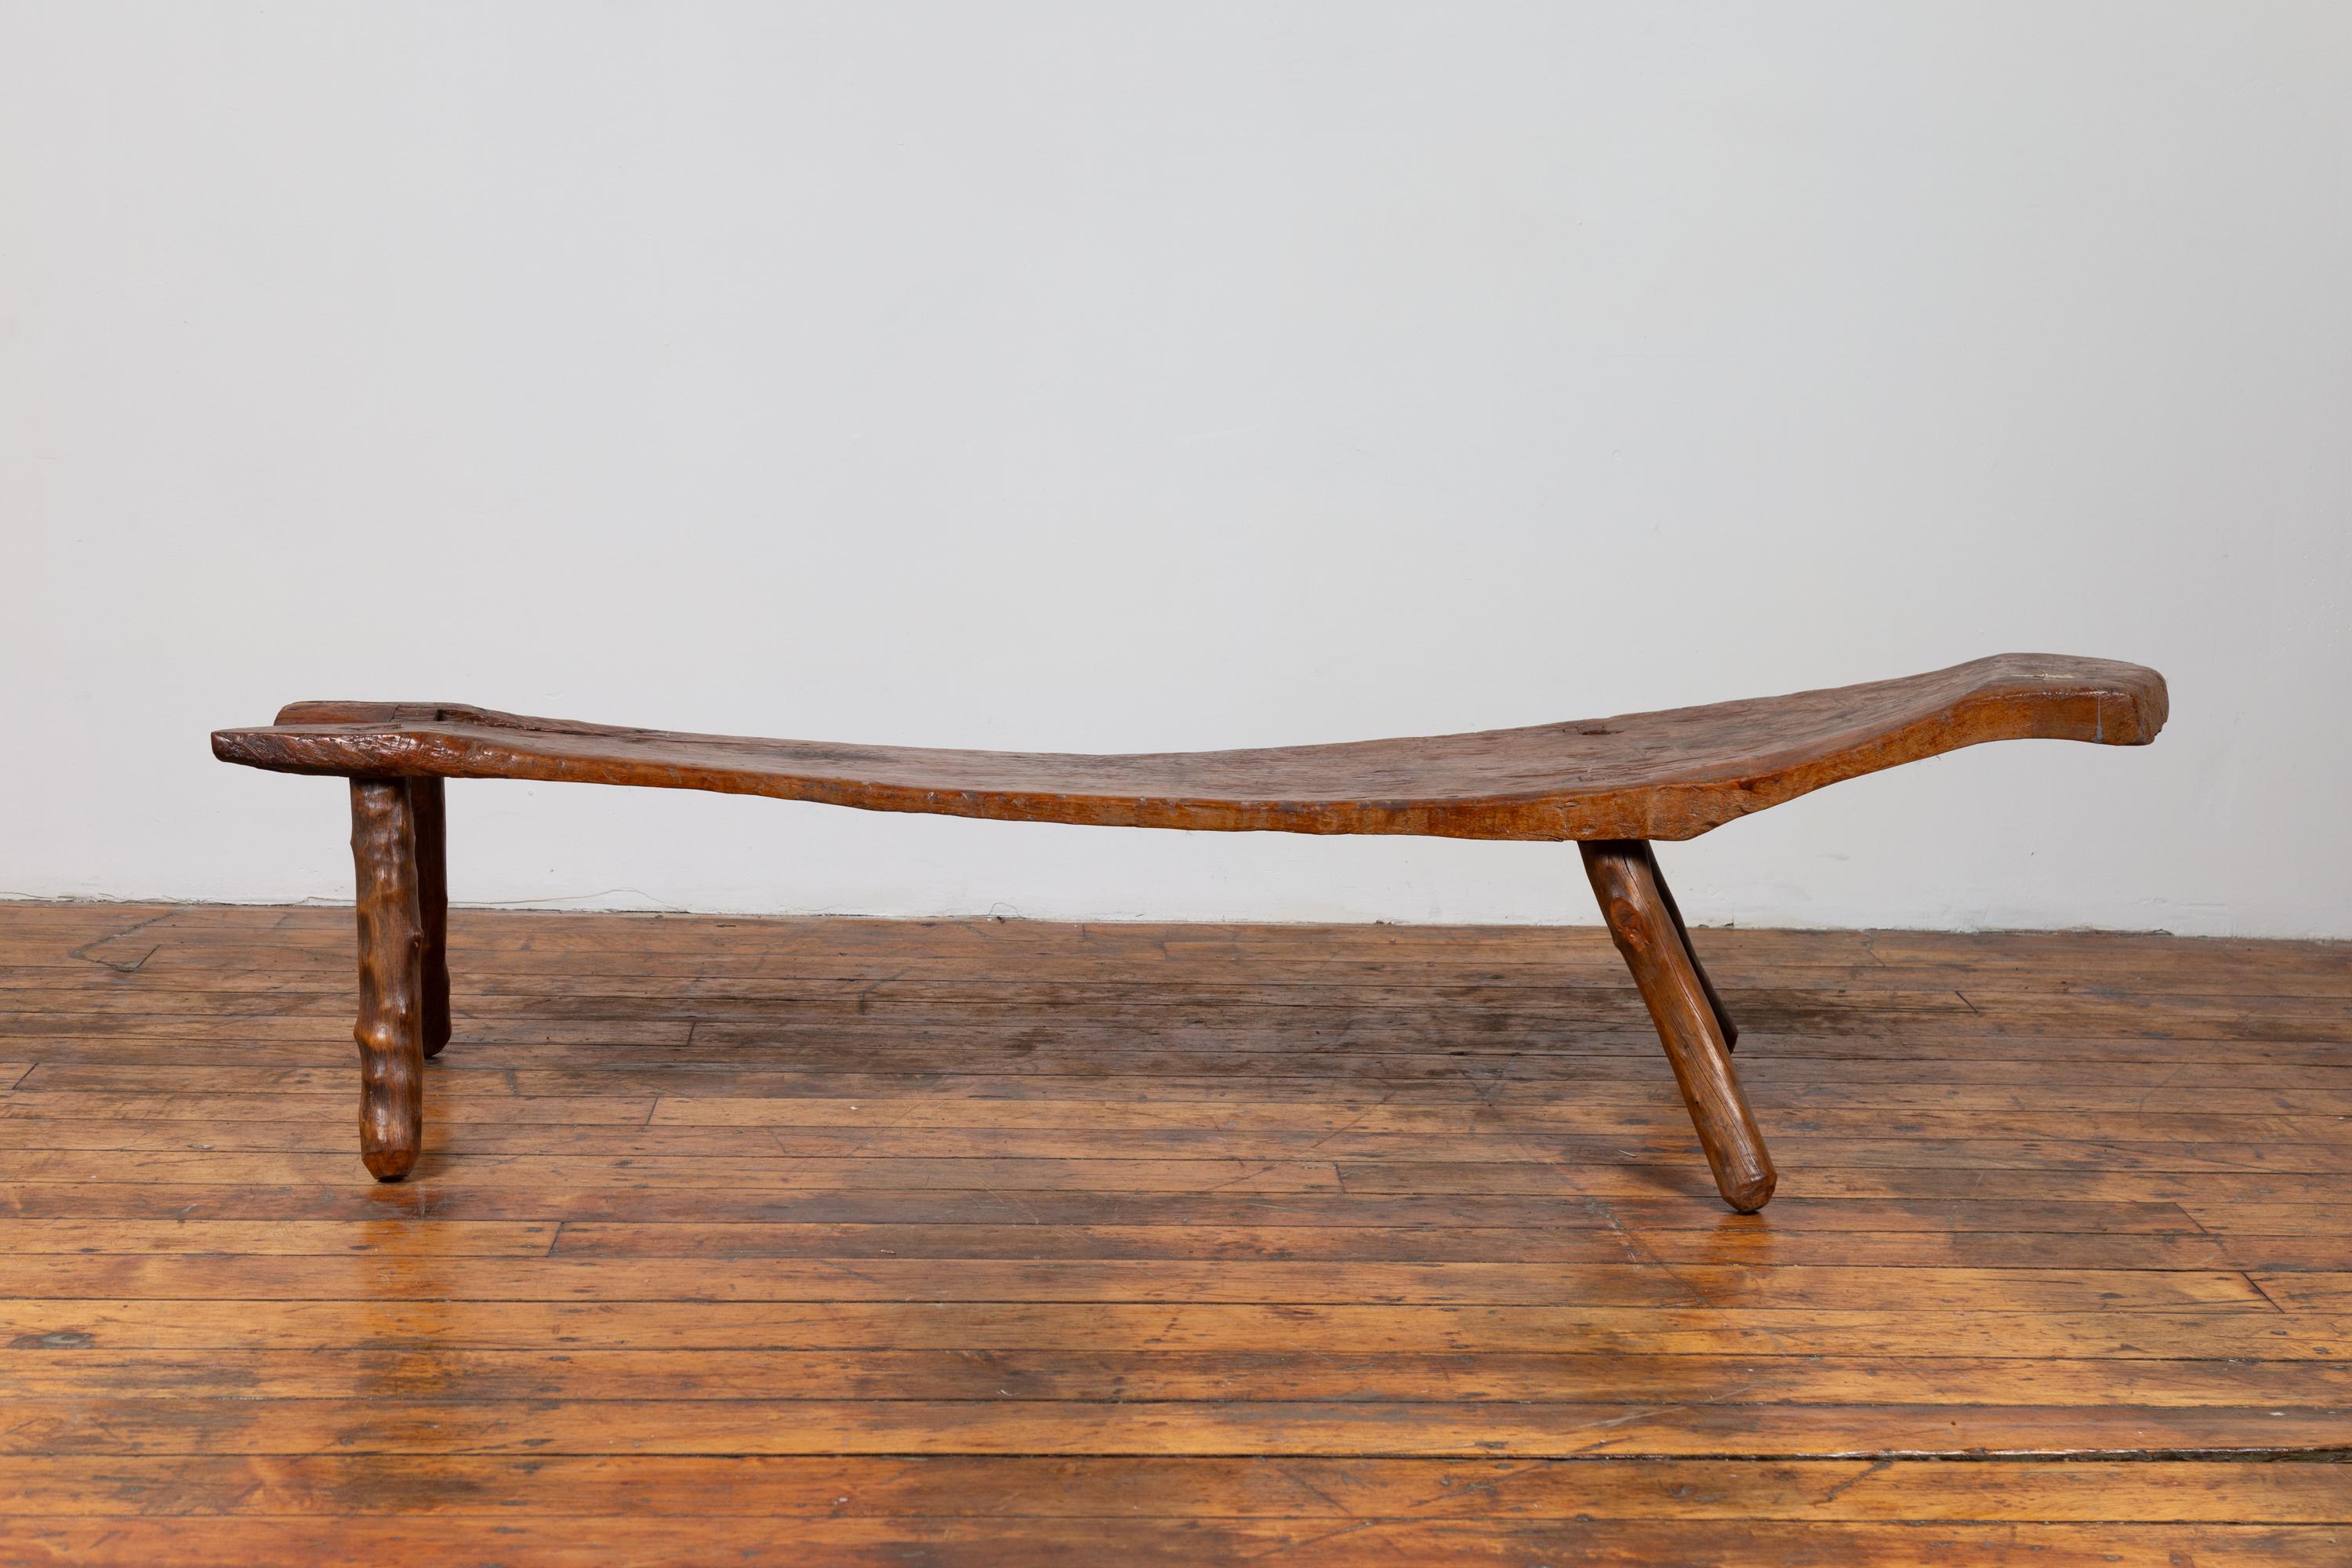 A rustic Indonesian freeform wooden bench from the 19th century, with weathered appearance. Born on the Island of Java during the 19th century, this rustic wooden bench charms our eyes with its freeform Silhouette and nicely weathered patina. A long